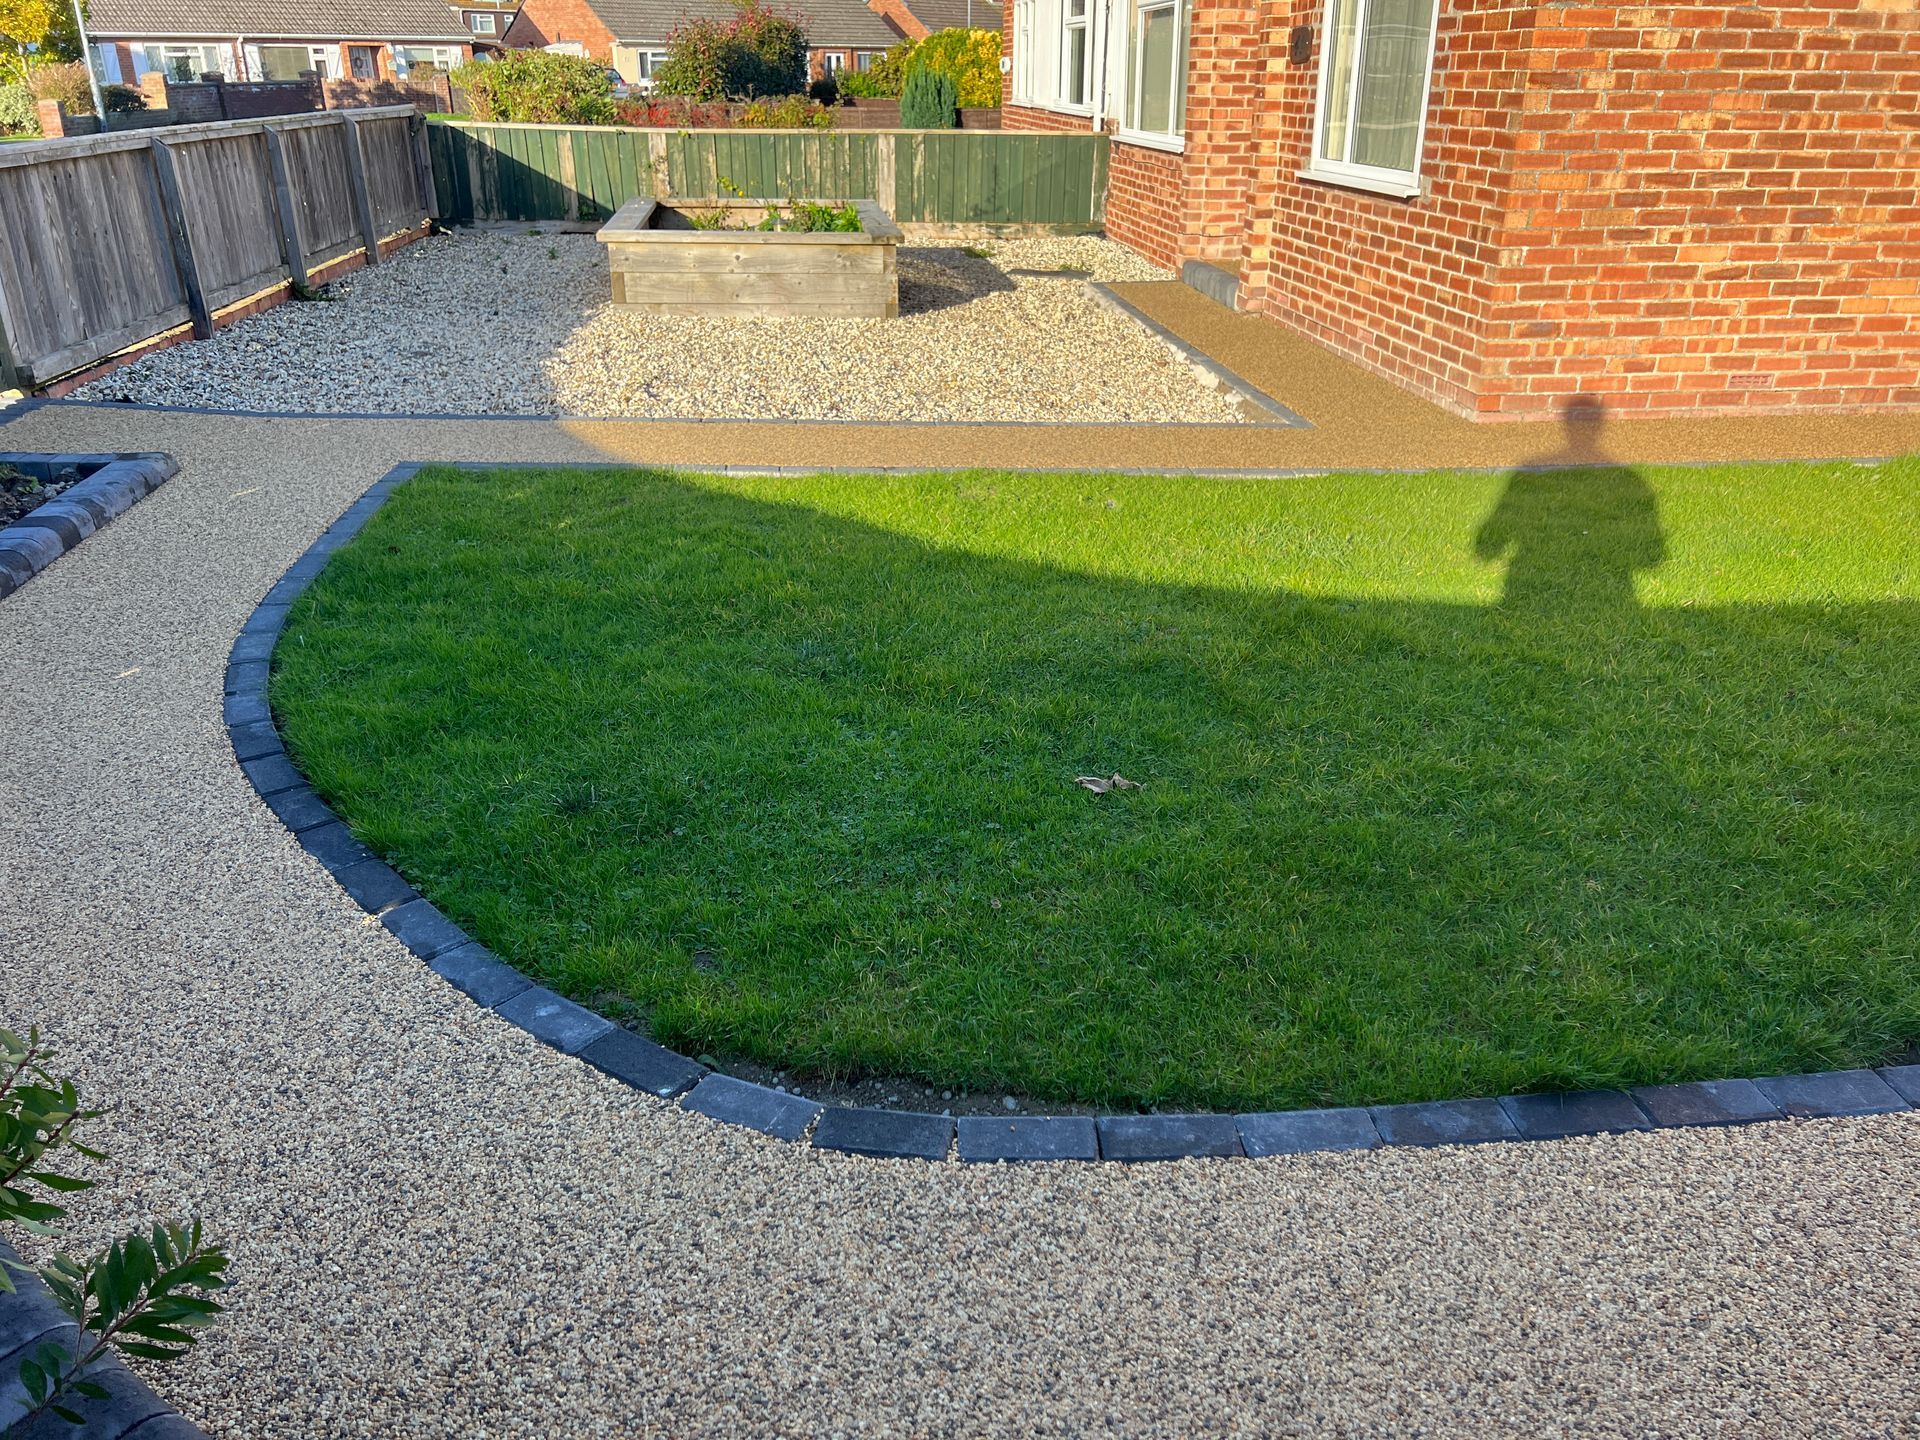 Sand coloured resin path and driveway surrounding by grass plots outside a red brick house.